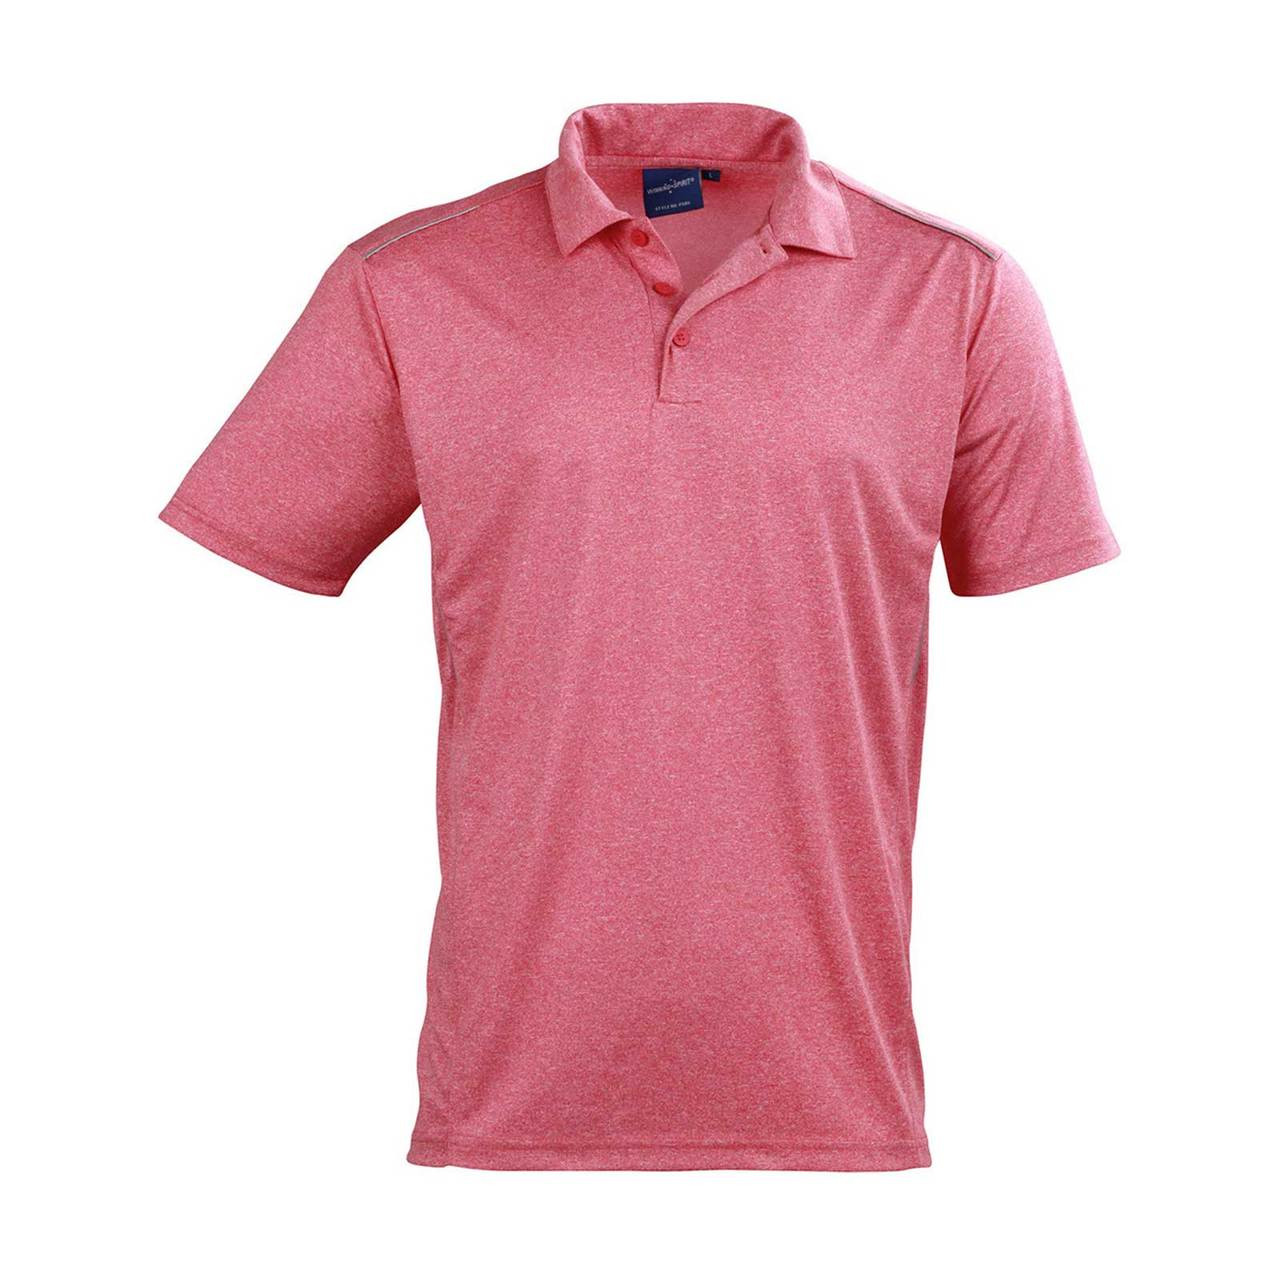 Mens Quick Dry Polo Shirt Reflective Piping | Wholesale Sports Clothing ...